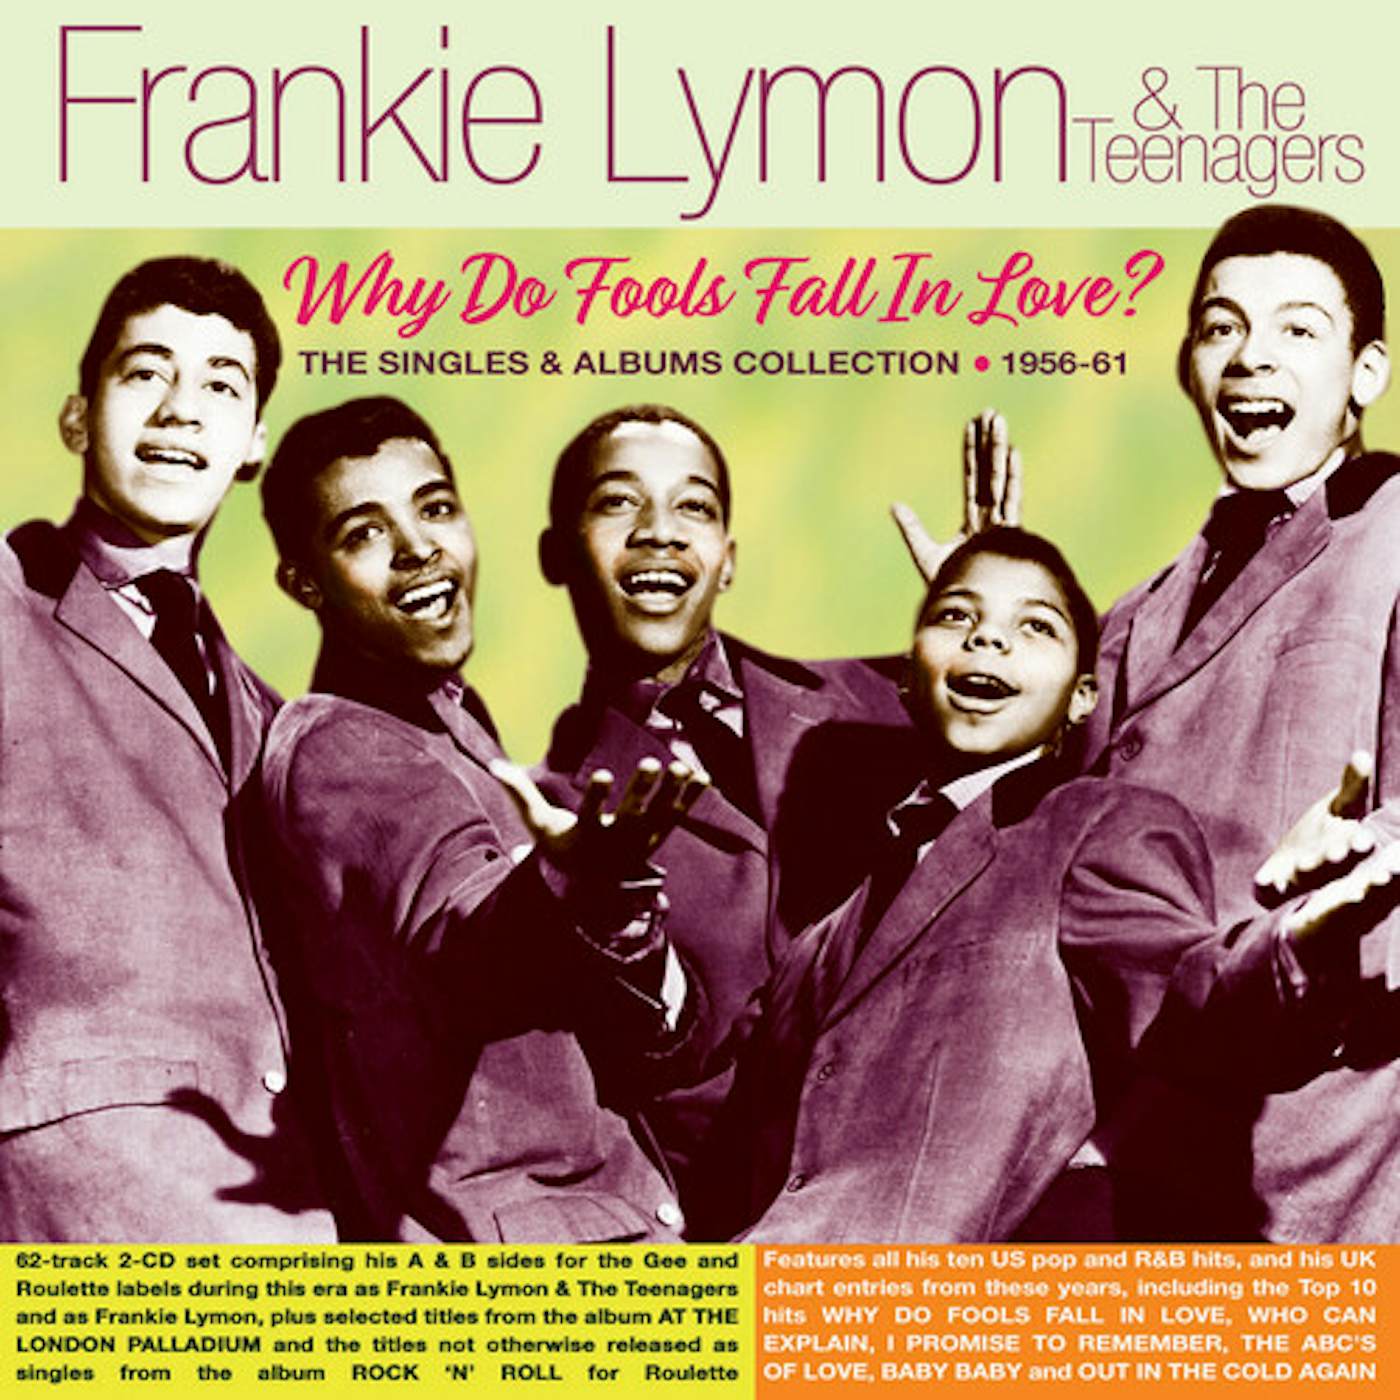 Frankie Lymon & The Teenagers WHY DO FOOLS FALL IN LOVE? CD